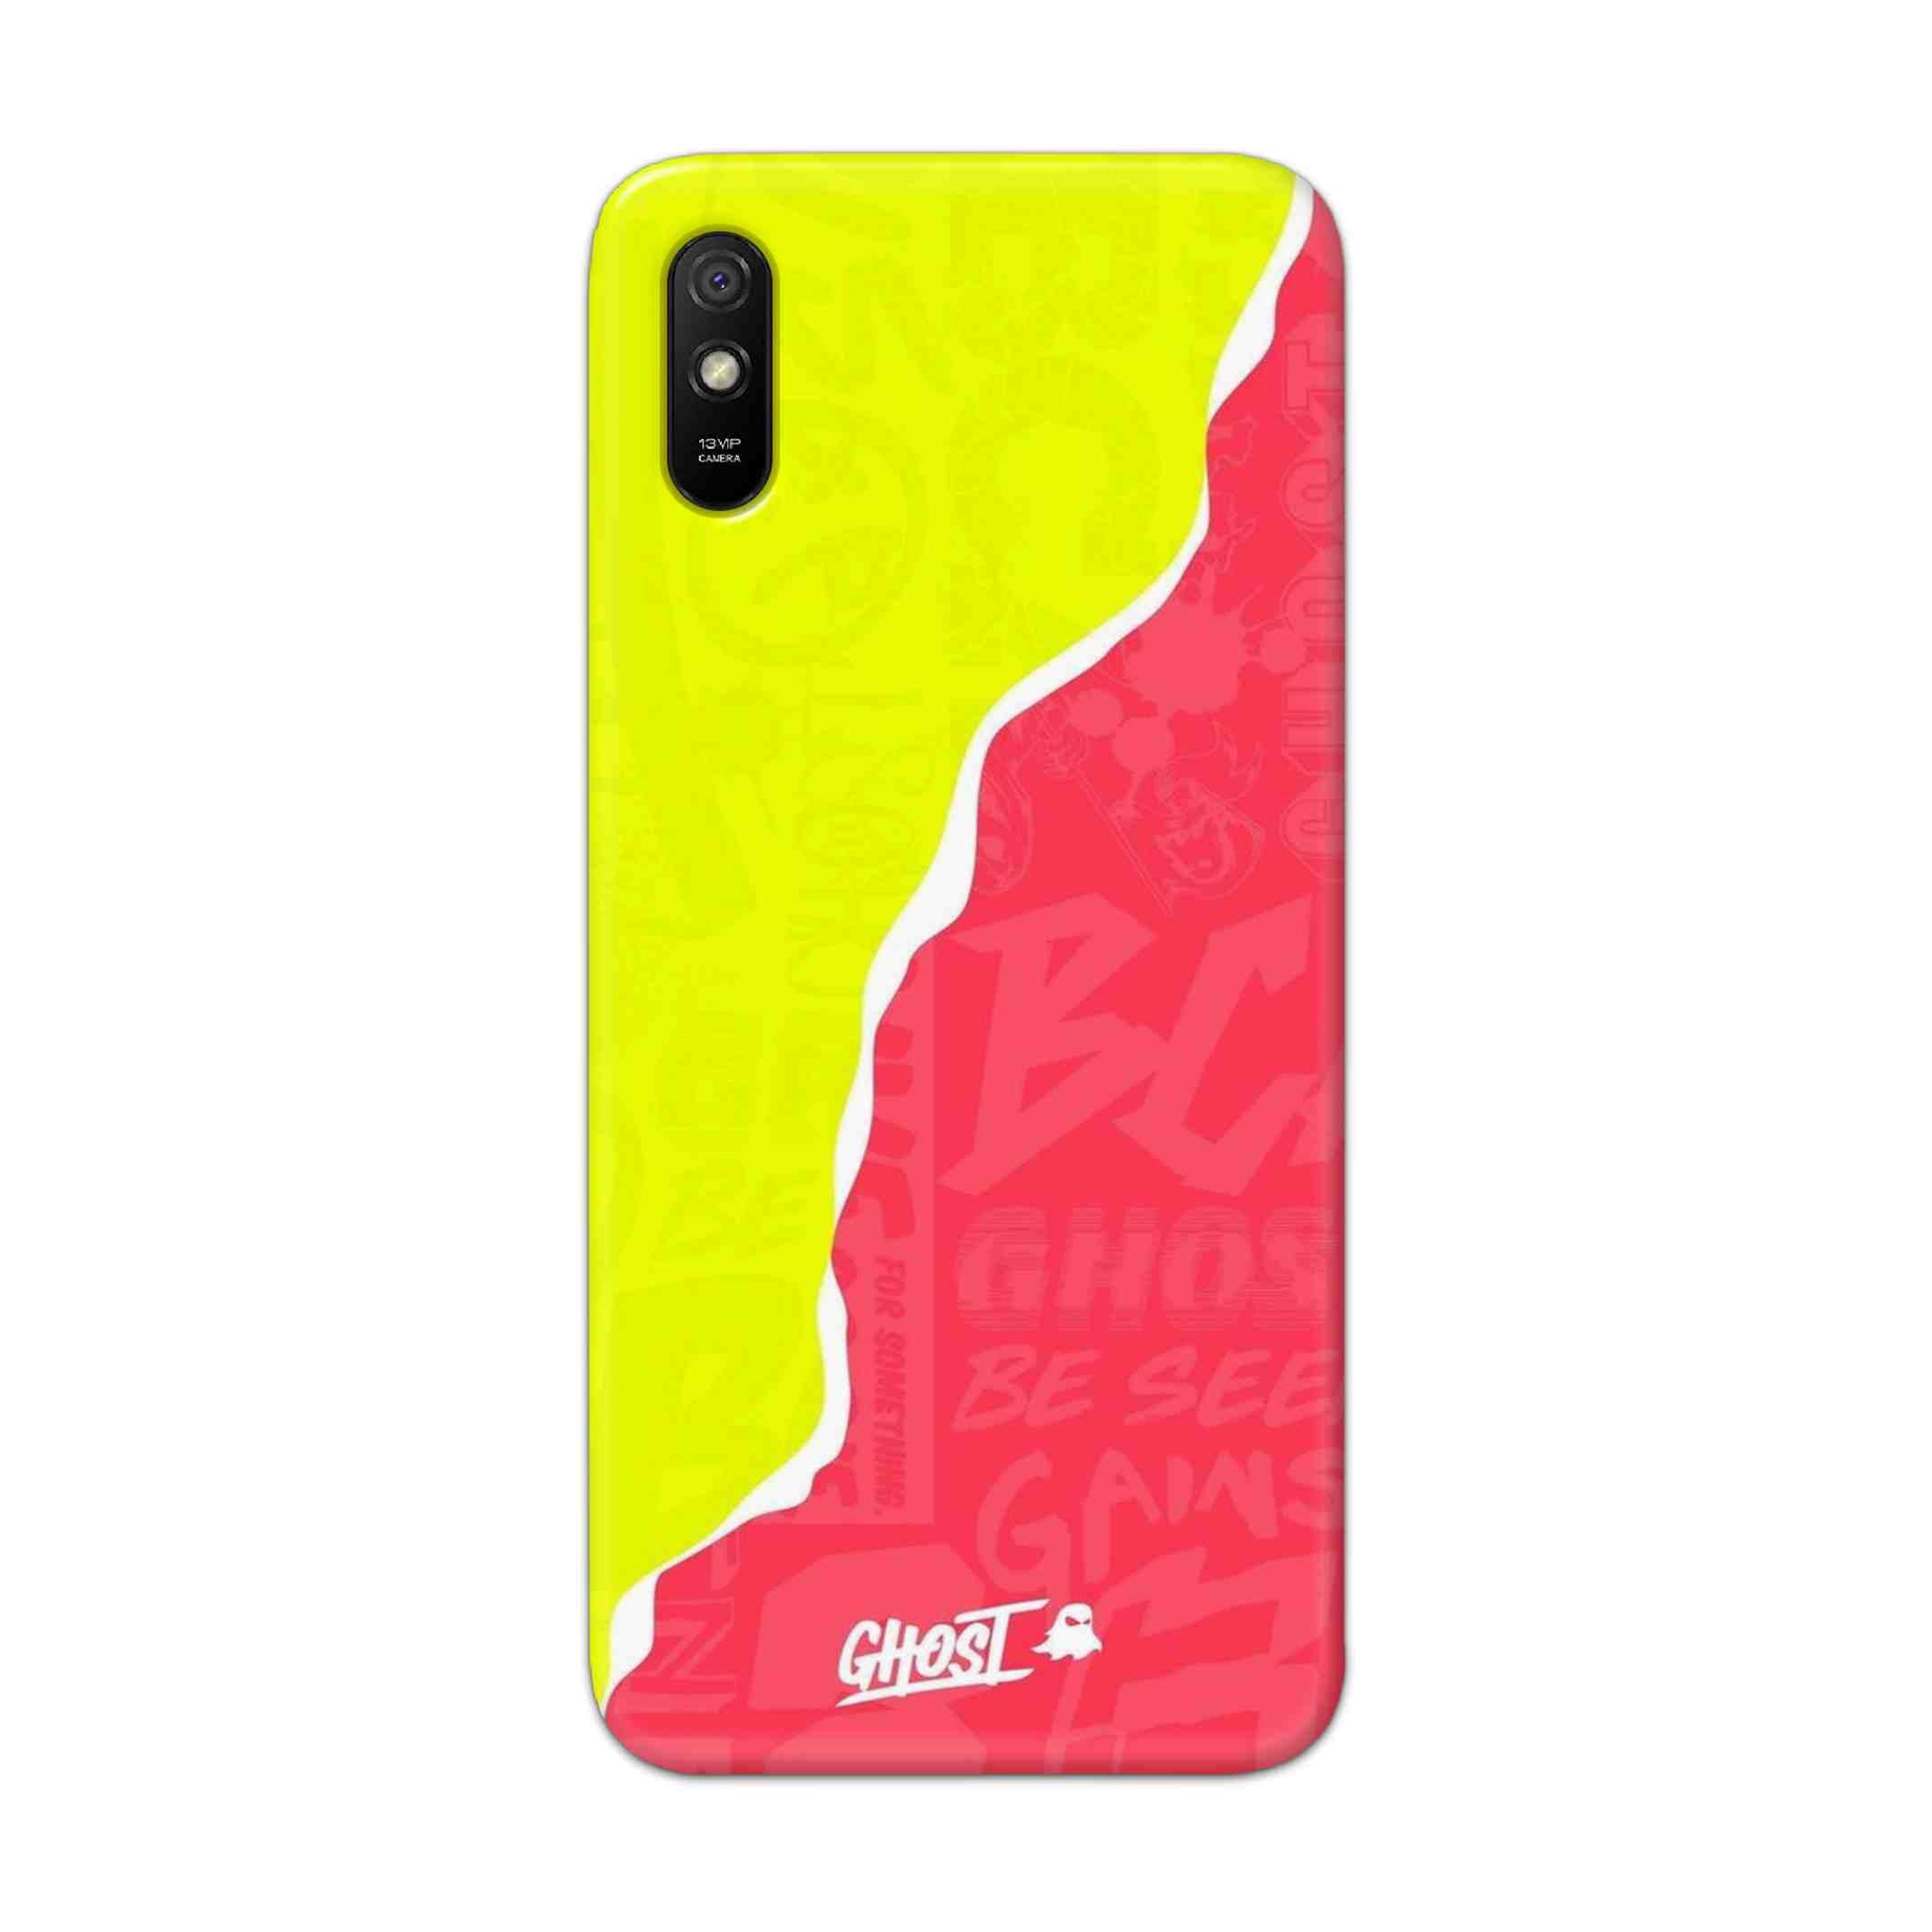 Buy Ghost Hard Back Mobile Phone Case Cover For Redmi 9A Online